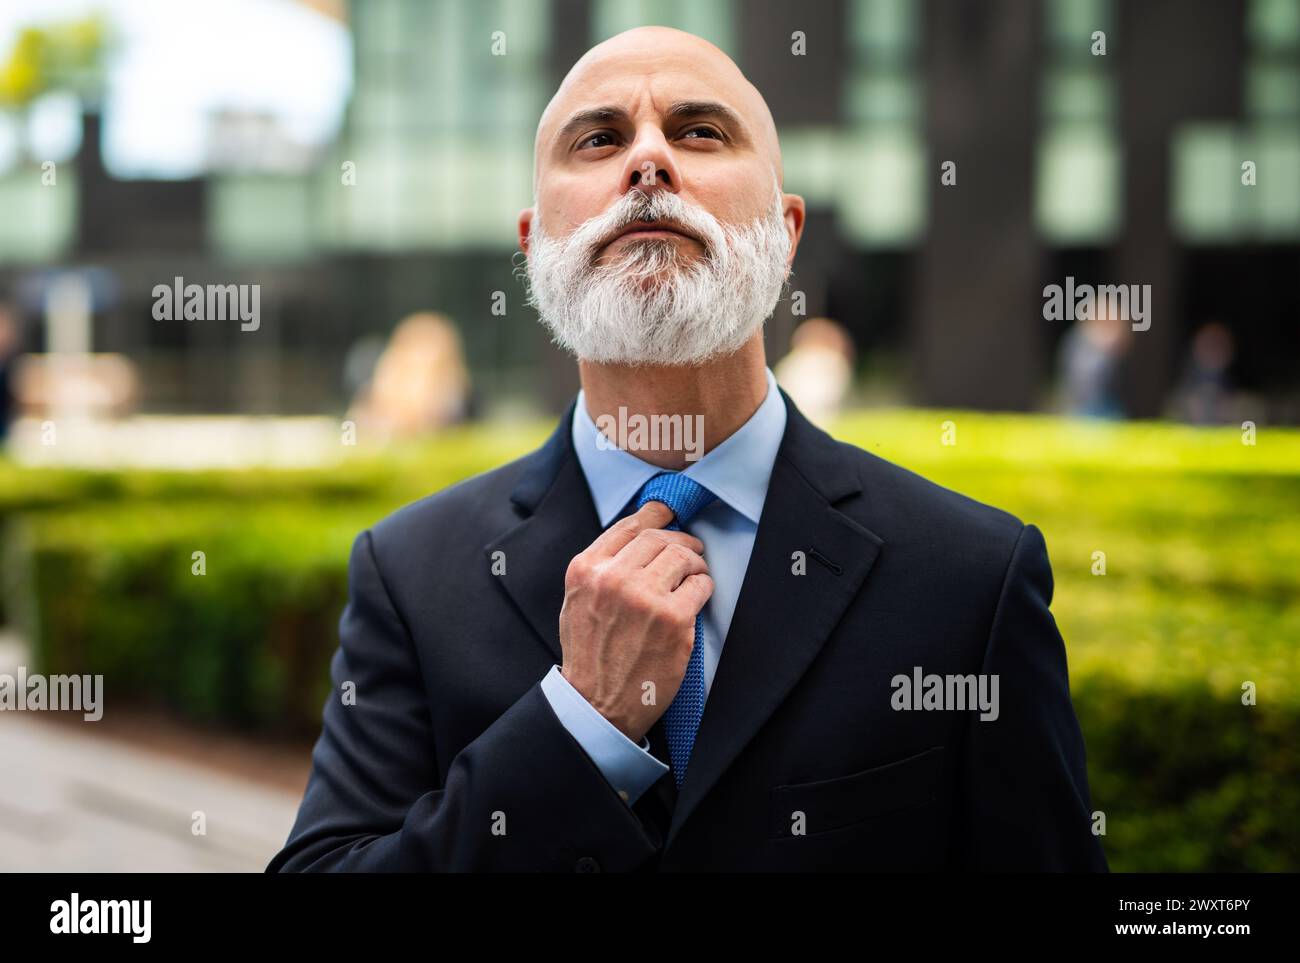 Mature bald stylish business man portrait with a white beard outdoor adjusting his necktie Stock Photo